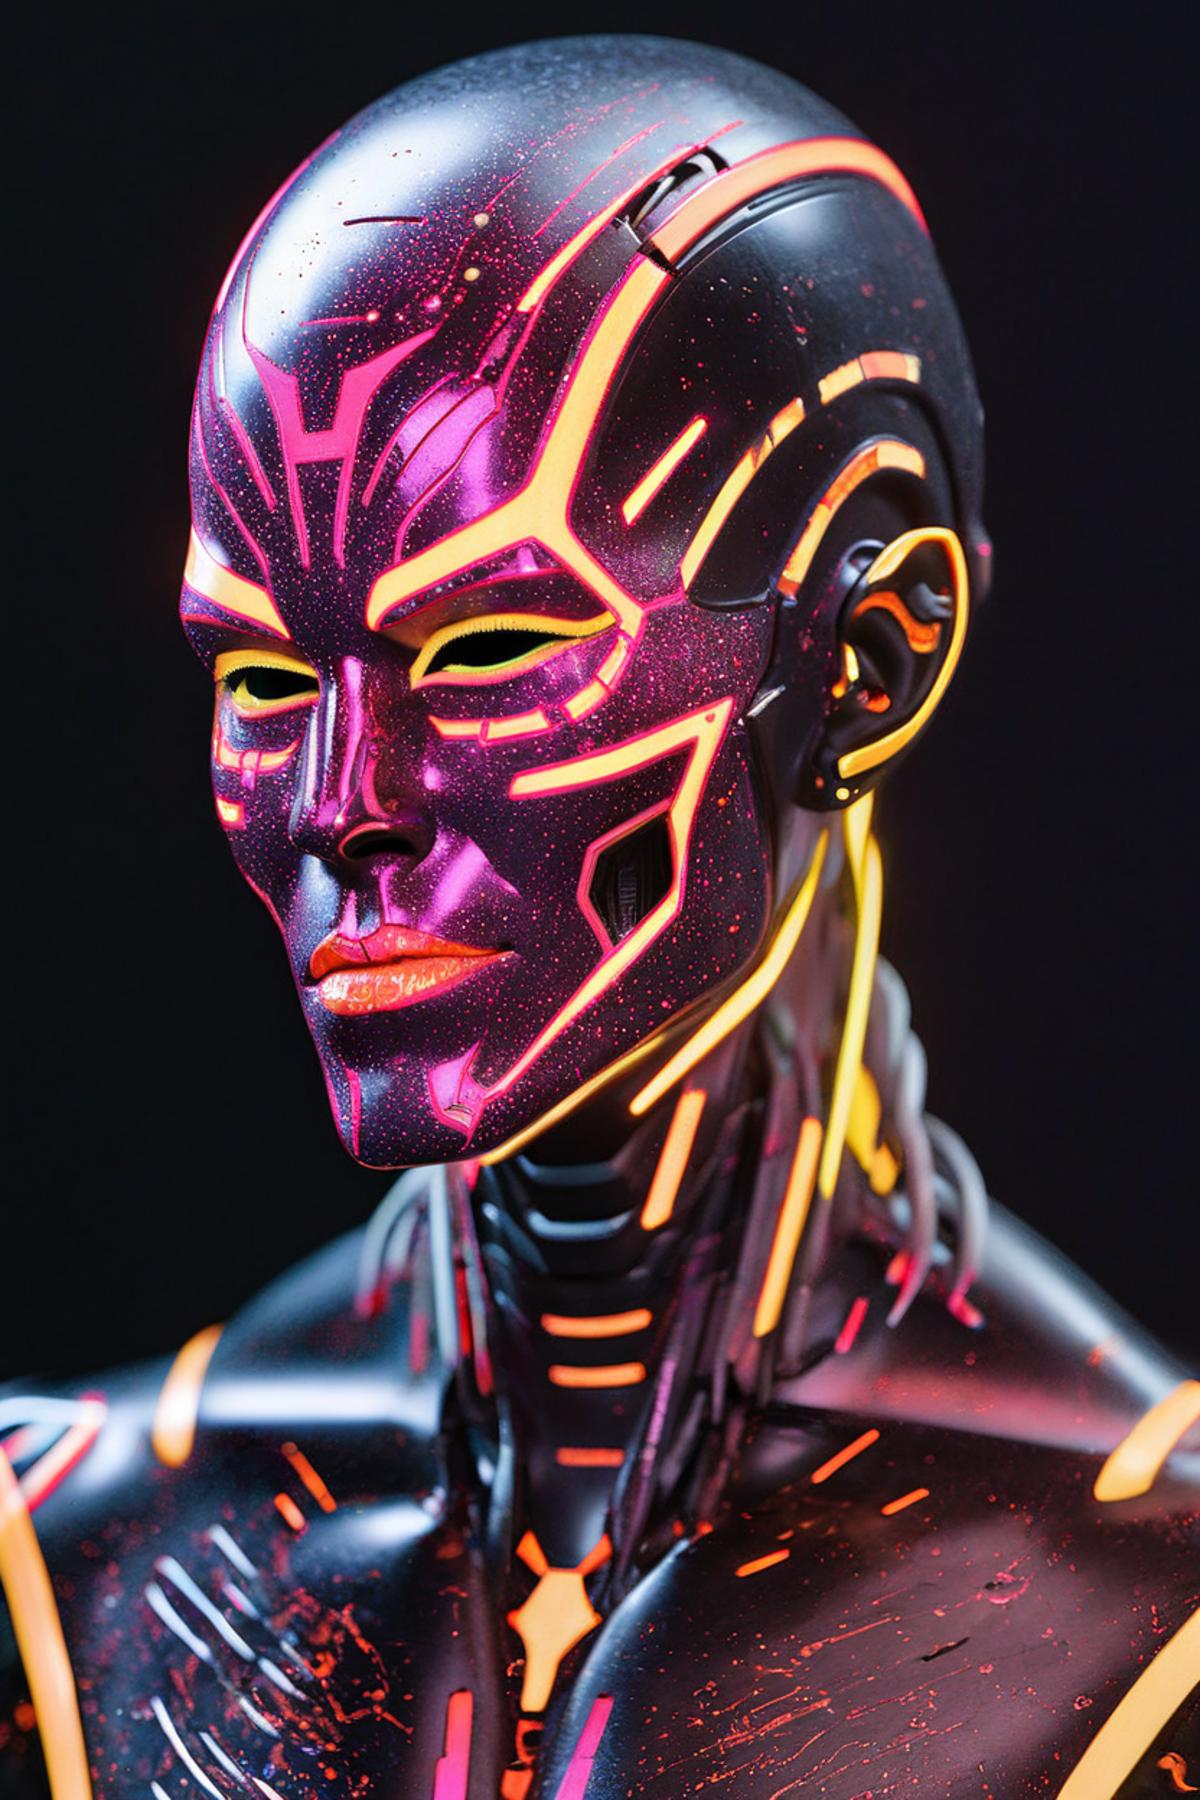 AI model image by chillpixel